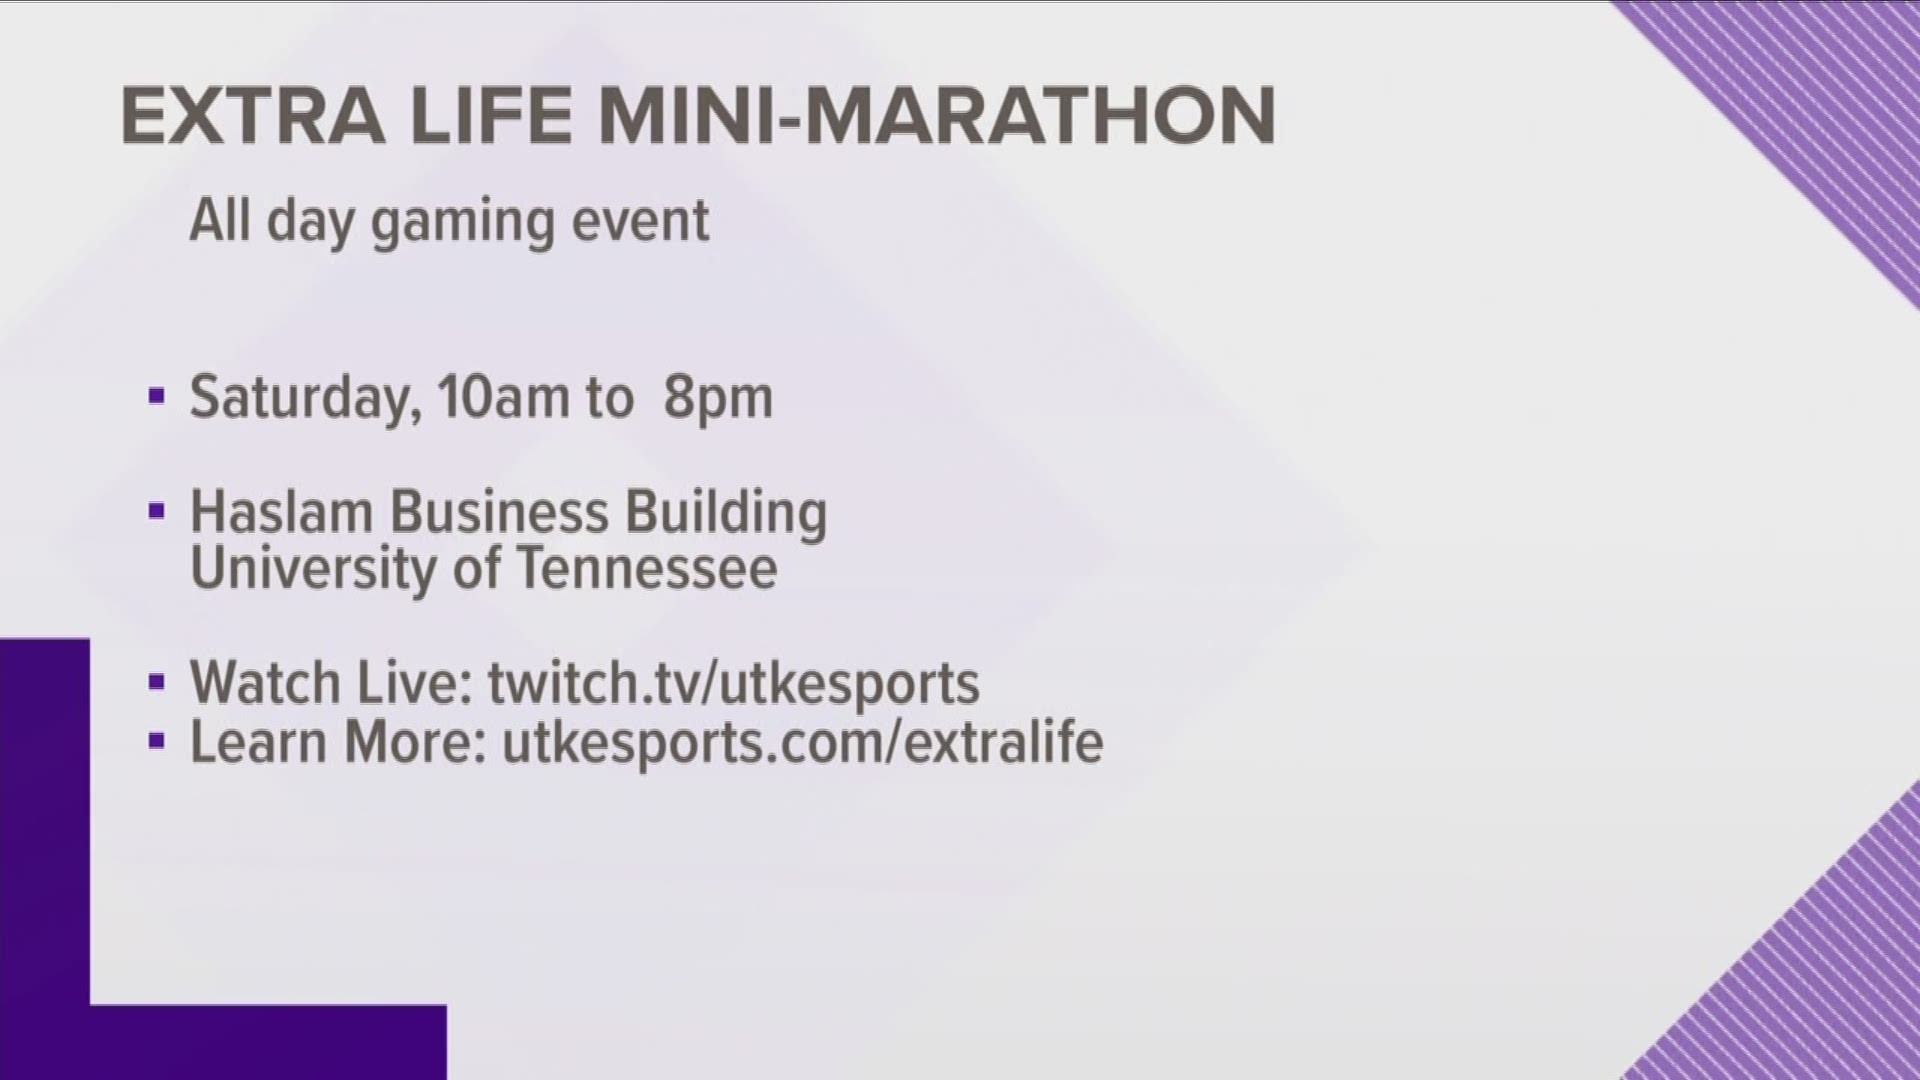 UTK ESports Club Extra Life will host a daylong gaming event at Haslam Business Building (University of Tennessee). Event starts at 10am and ends at 8pm. Event benefits East Tennessee Children's Hospital. Learn more at utkesports.com/extralife and watch l